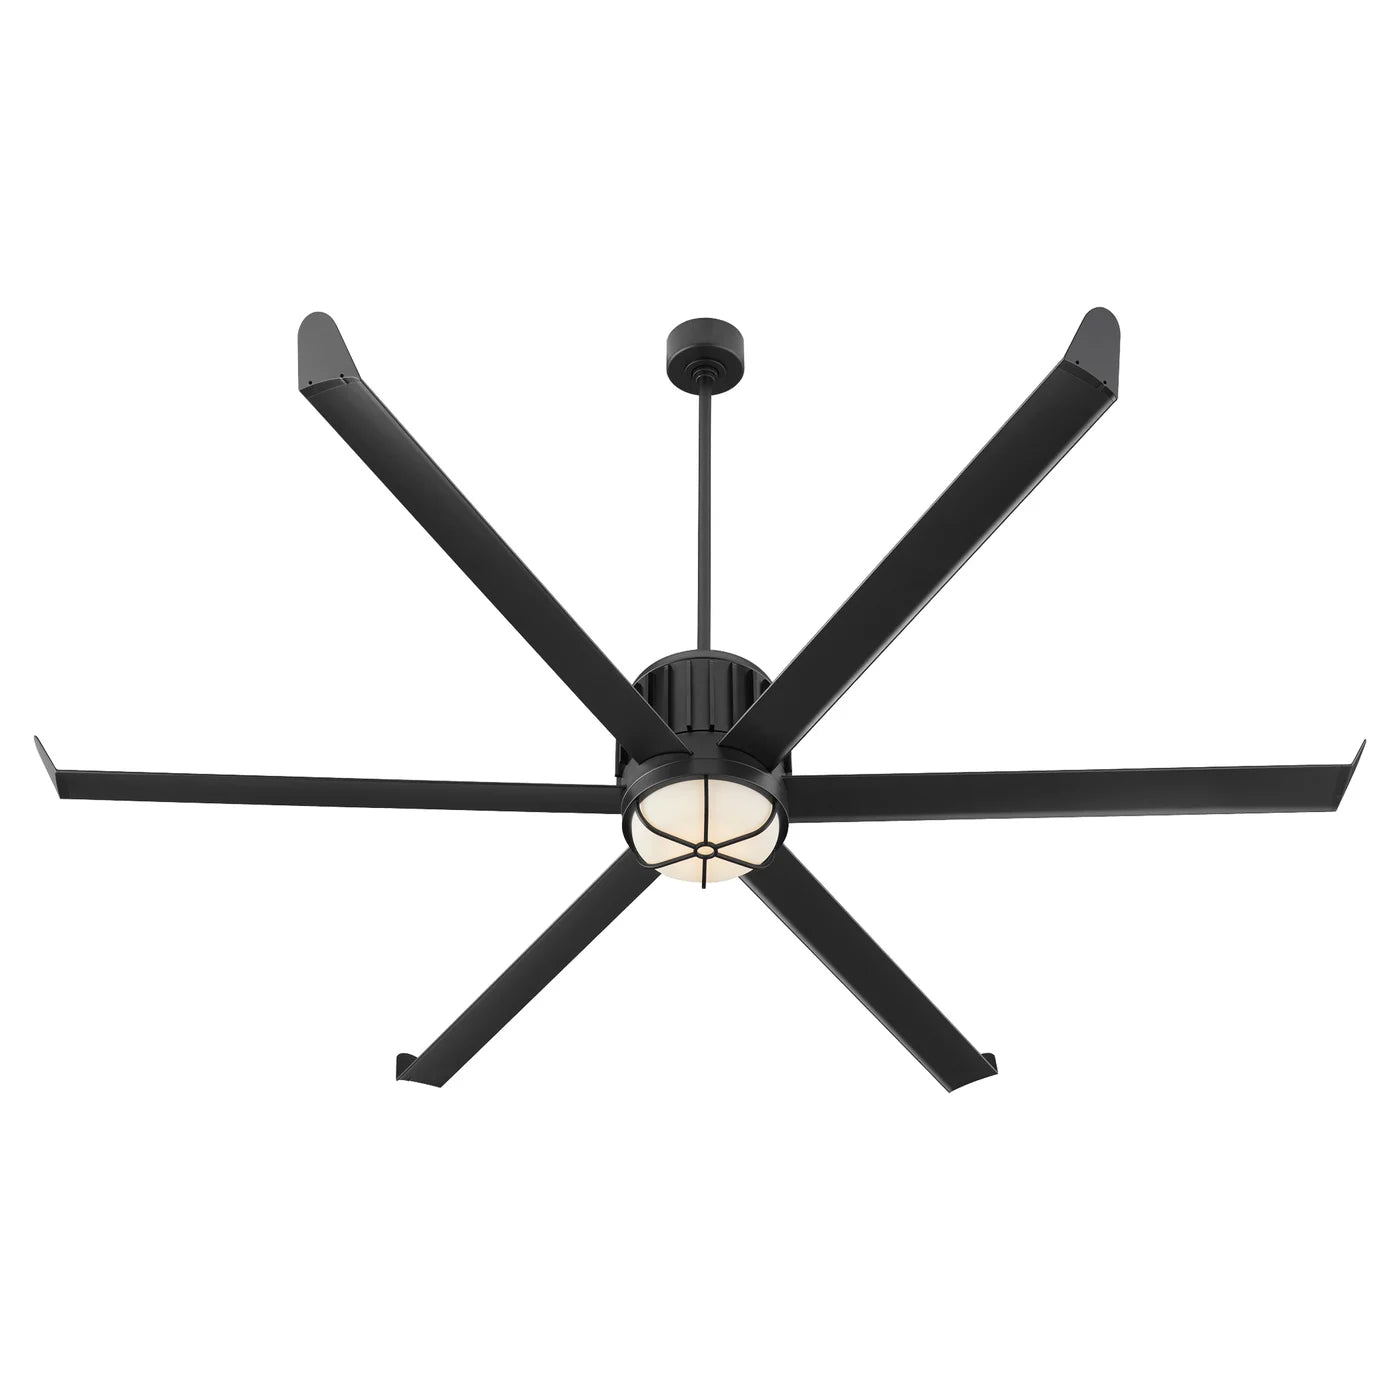 Oxygen ENORME 3-129-15 Ceiling Fan 78 Inch Wet Rated - Black